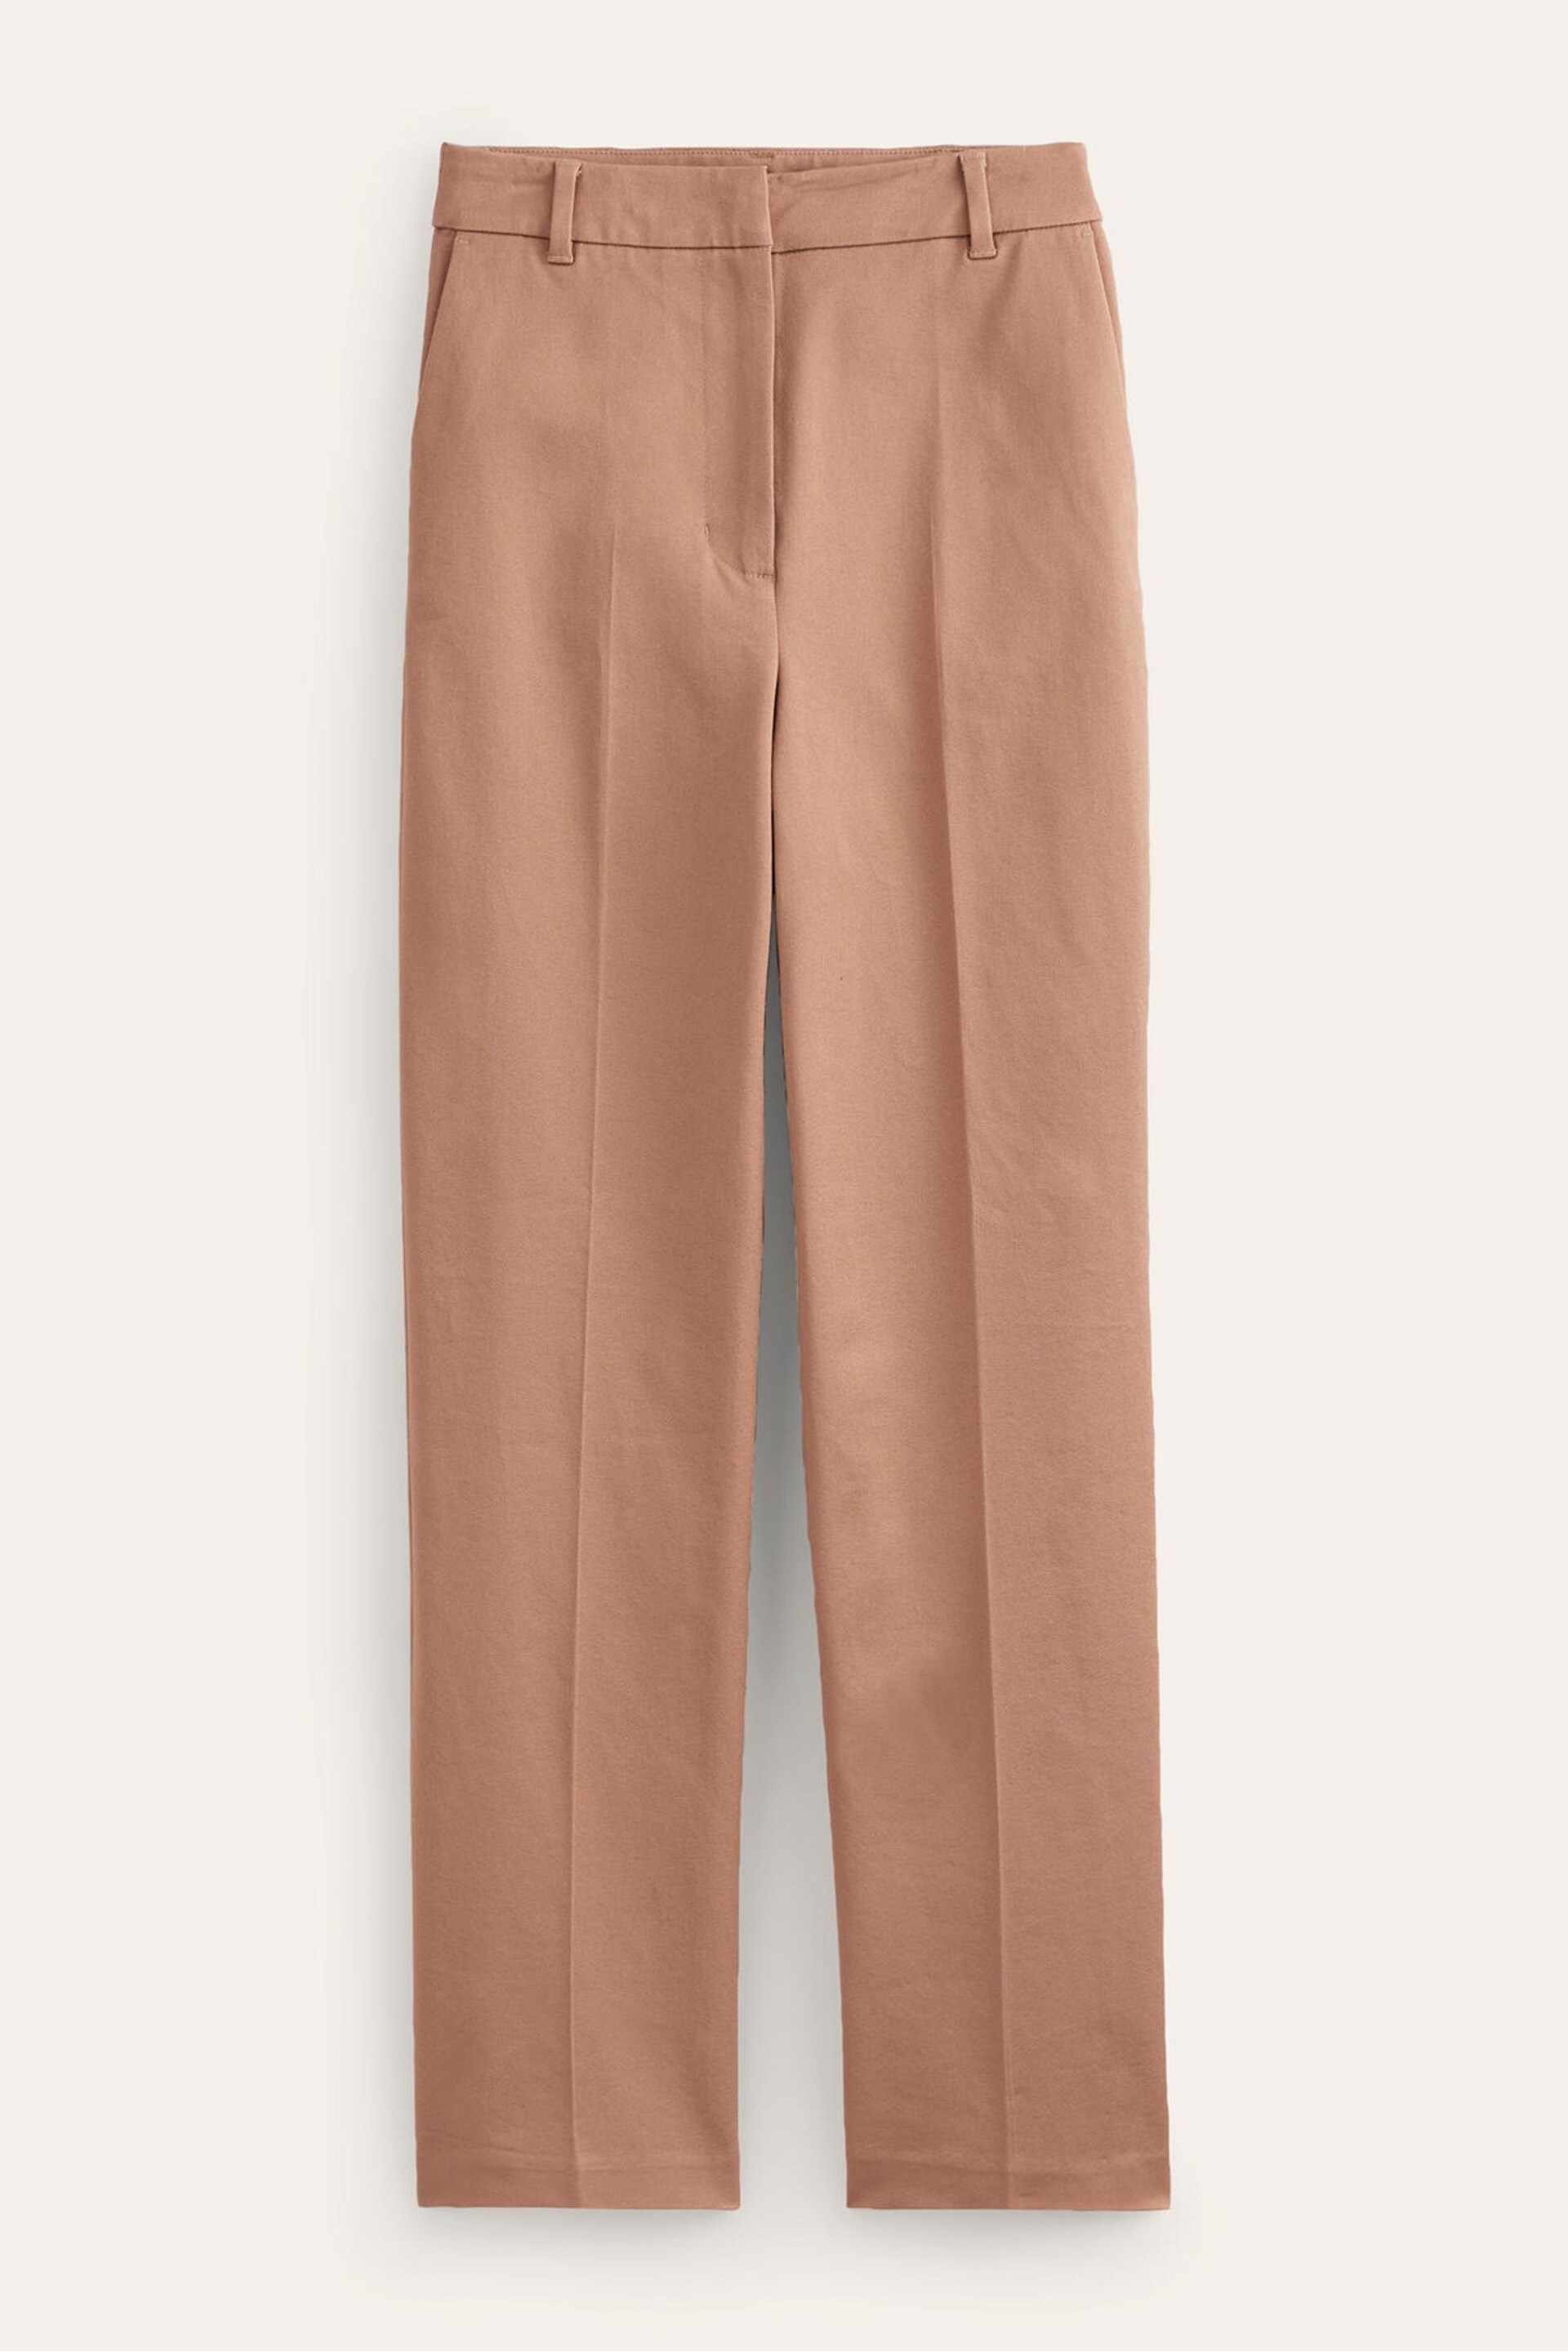 Boden Brown Kew Bi-Stretch Trousers - Image 5 of 5